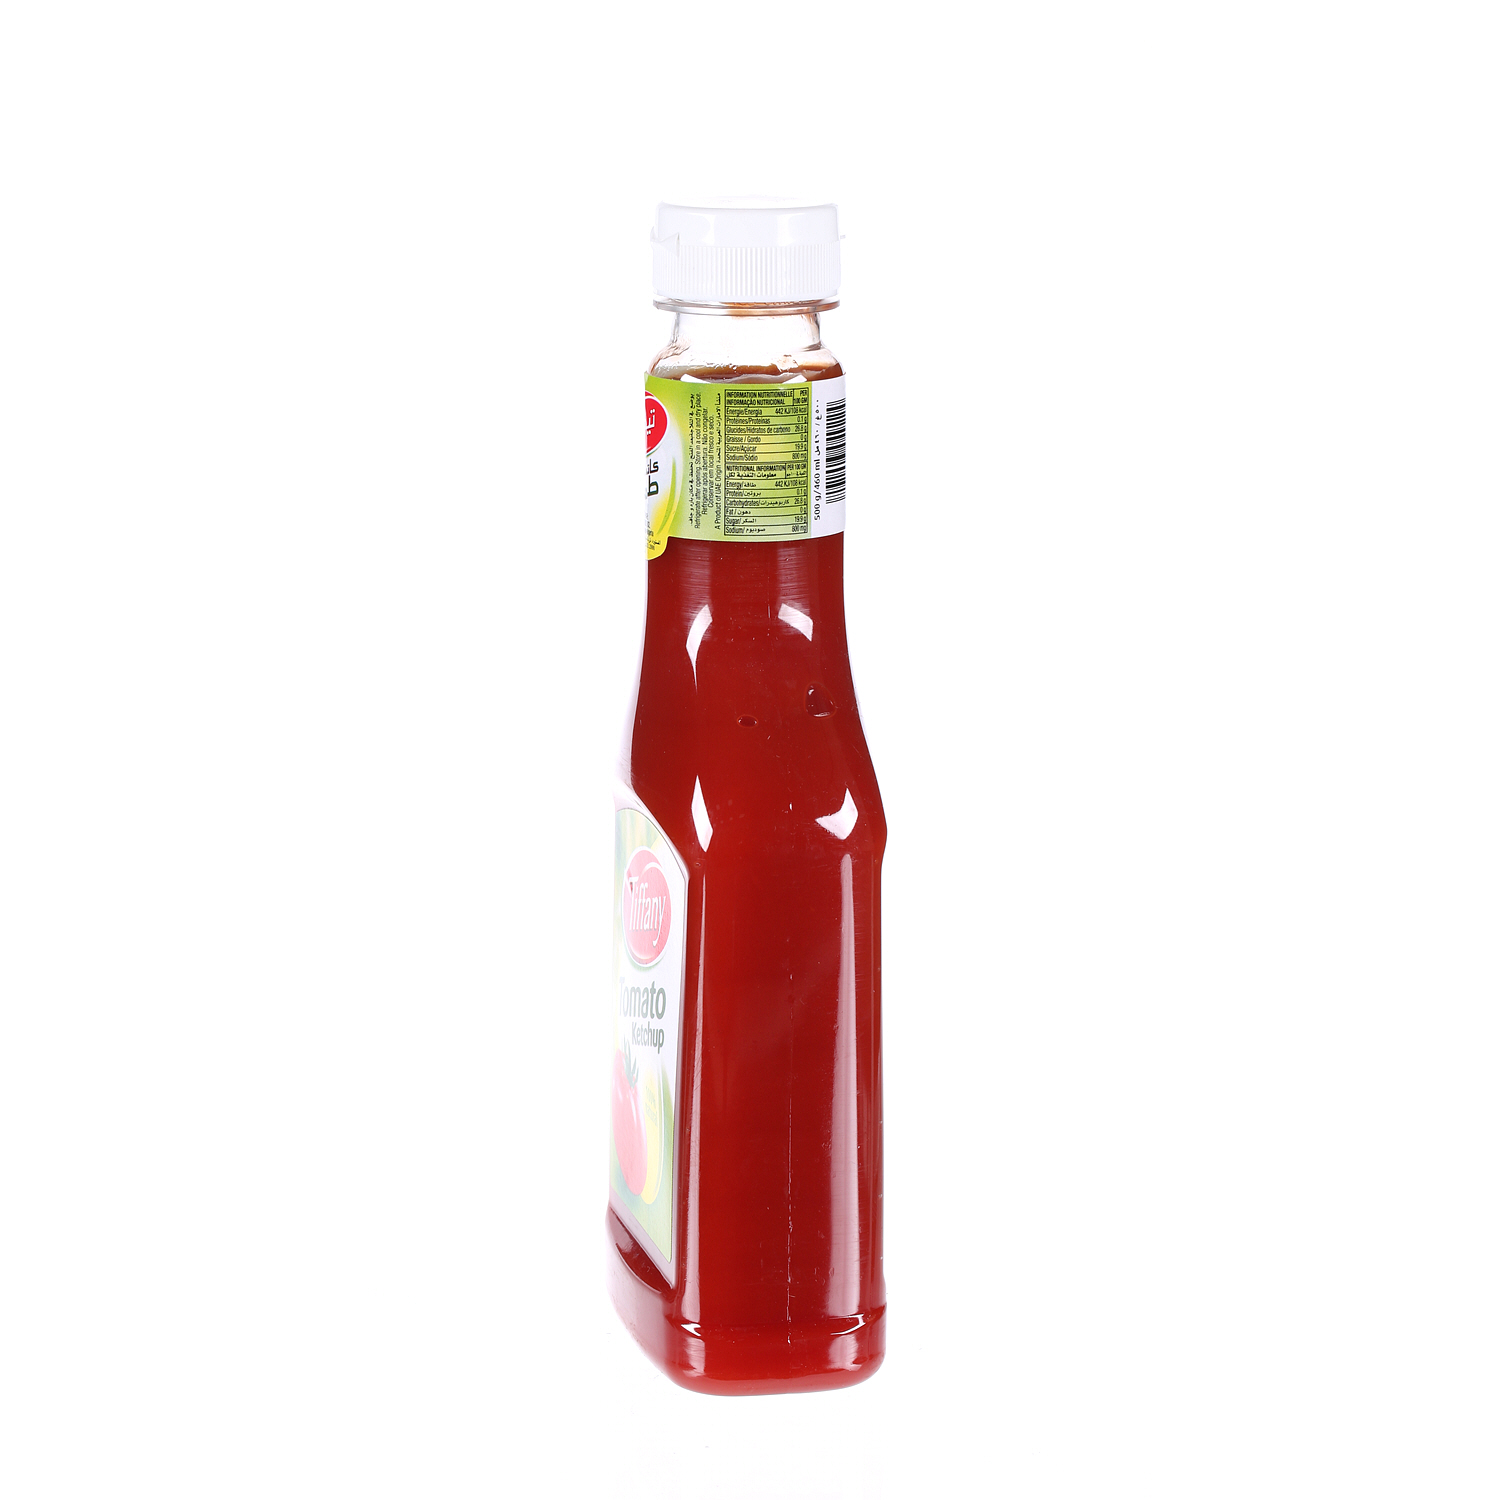 Tiffany Squeezy Ketchup 500 g